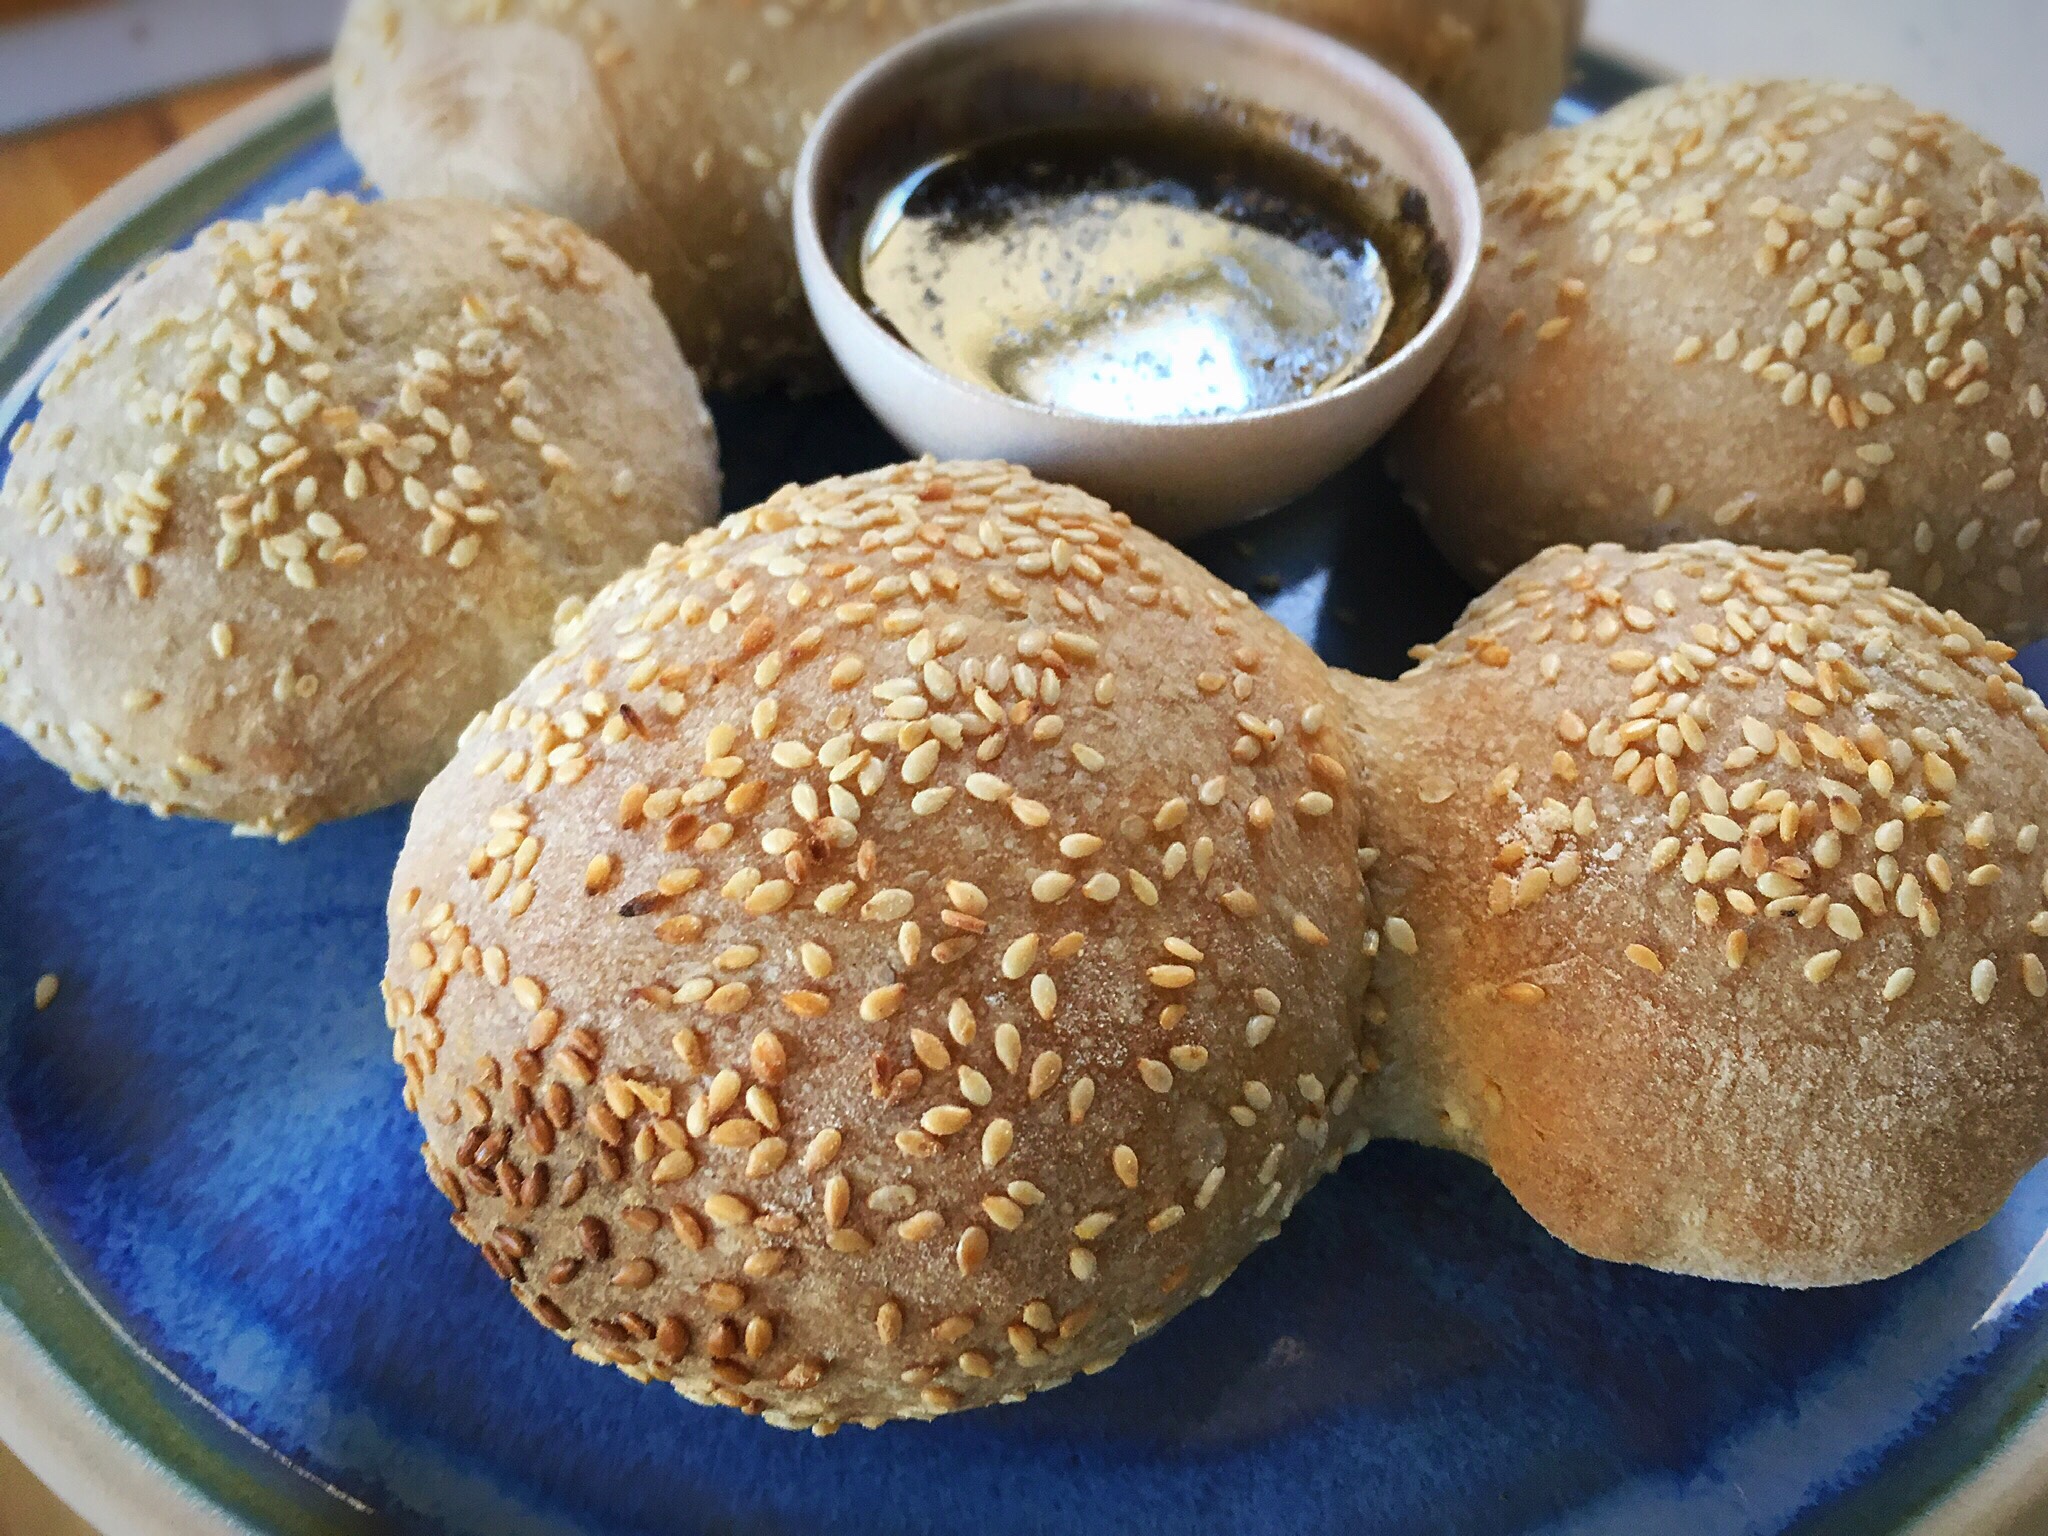 A plate of sesame seed rolls with dipping sauce.